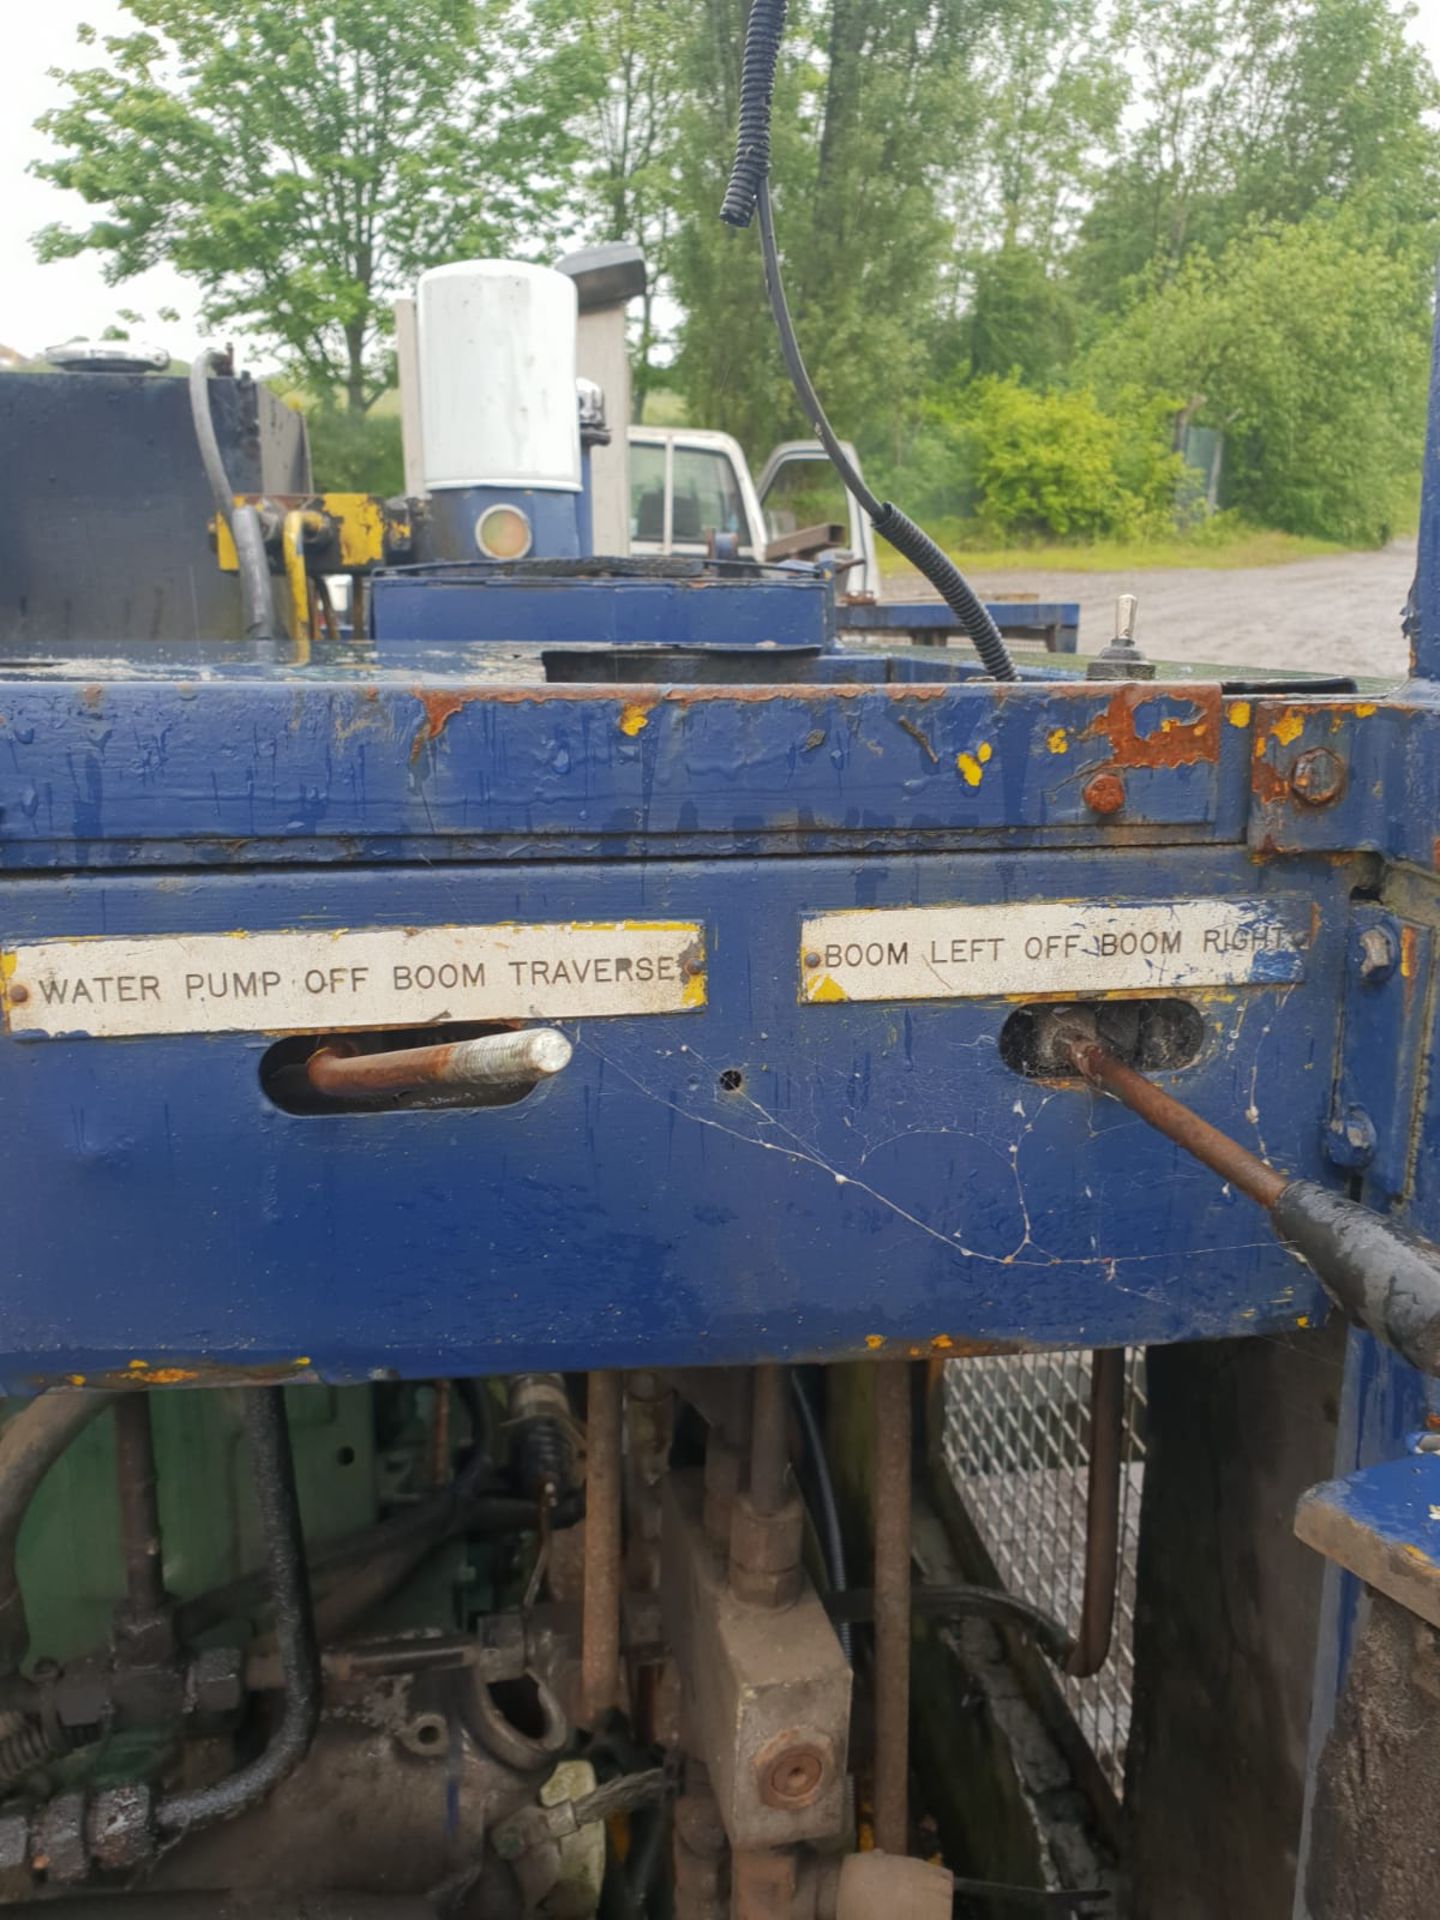 DIESEL HYDRAULIC WINCH LISTER PETTER ENGINE 2 CYLINDER, IN FULL WORKING ORDER *NO VAT* - Image 11 of 17